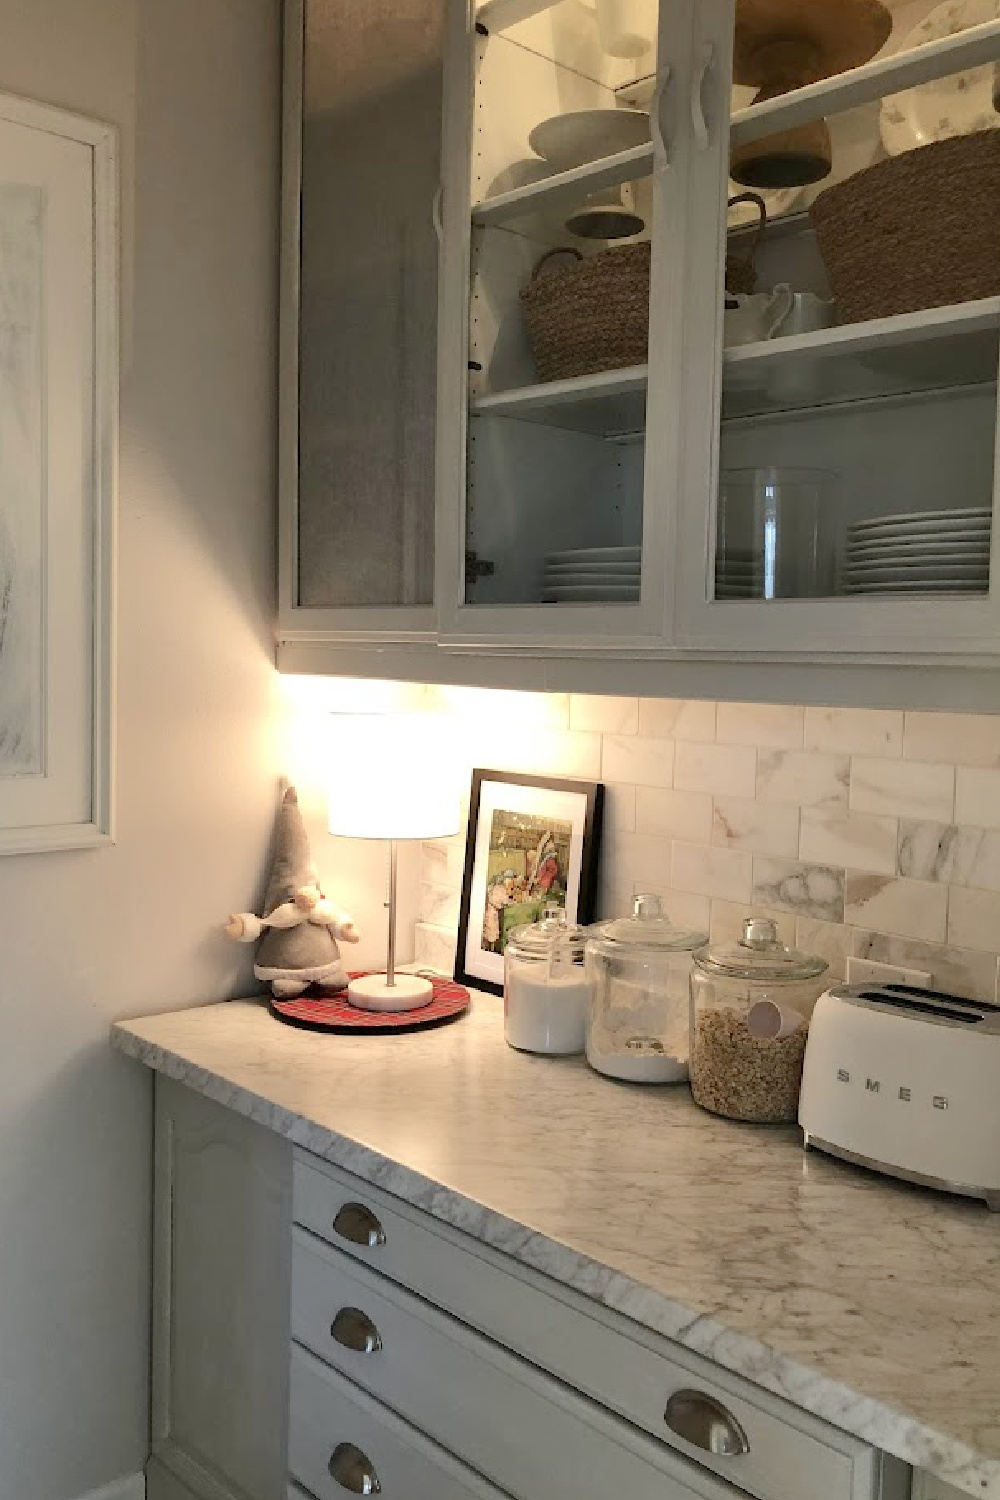 Inside the kitchen pantry is a built-in china cabinet I painted Pavilion Gray by Farrow & Ball. The backsplash is calacatta gold marble subway tile.